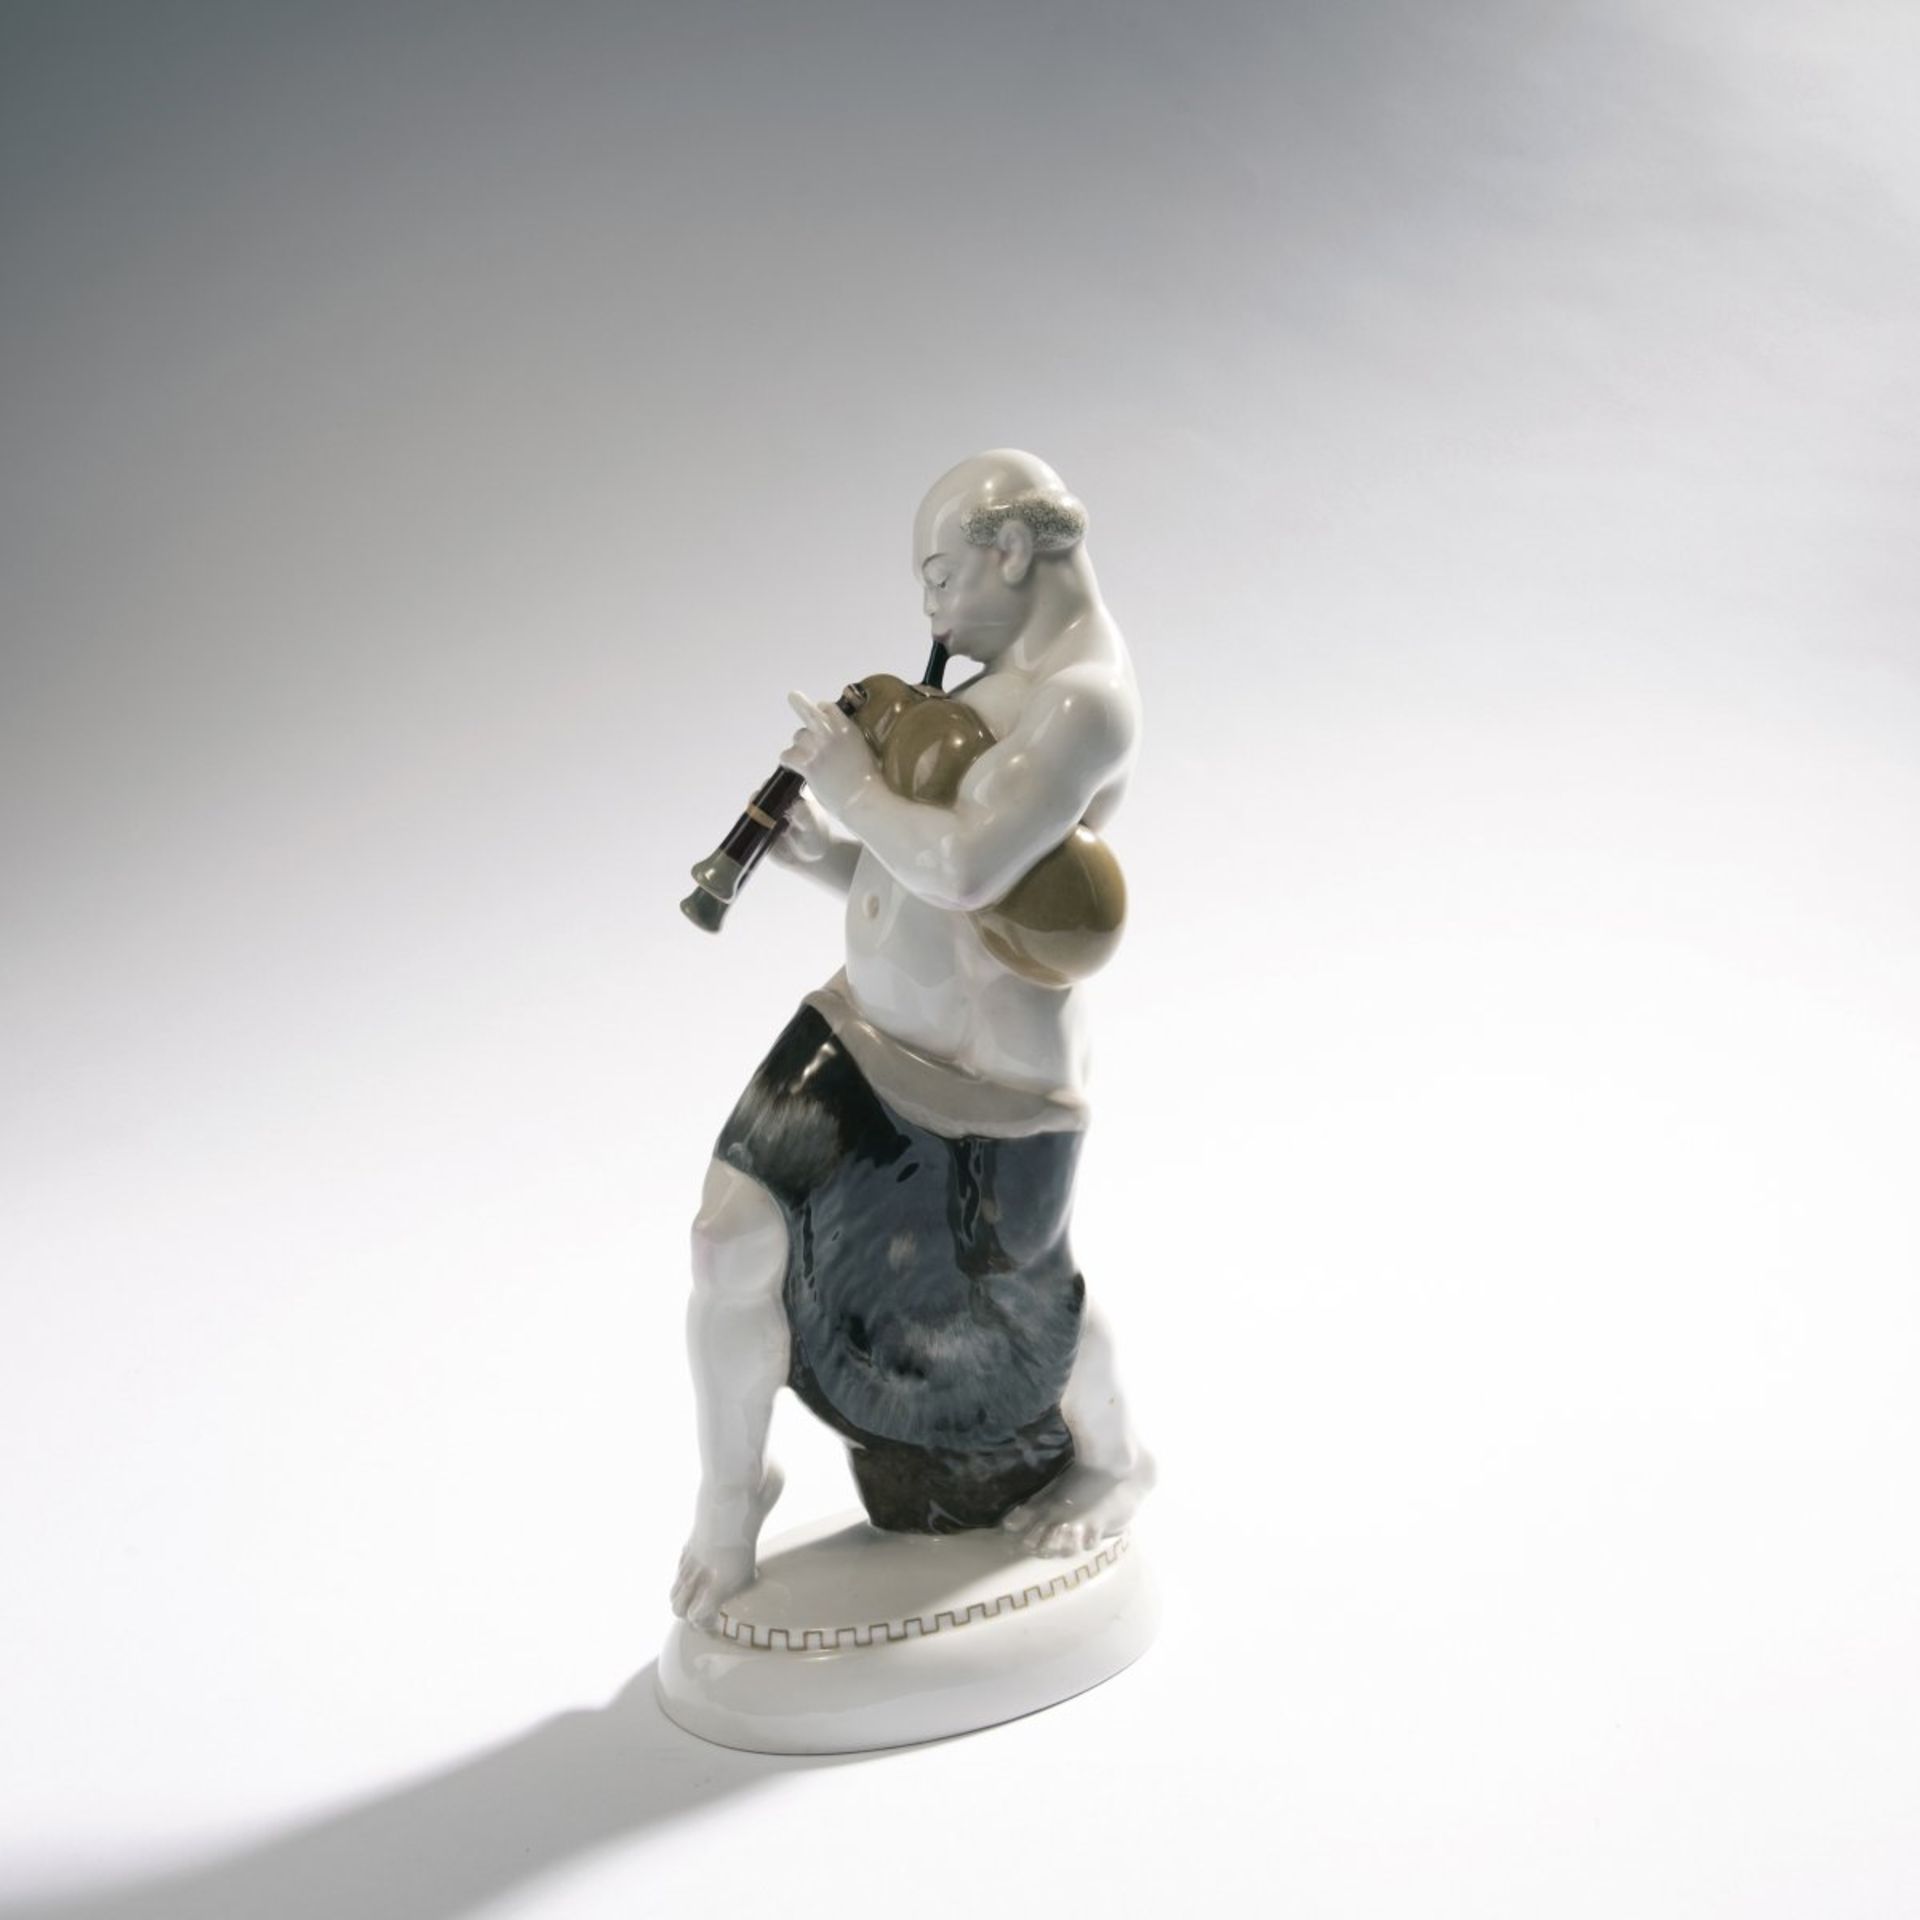 Adolph Amberg, 'Arabs', 1910'Arabs', 1910H. 28.6 cm. Made by KPM Berlin, in 1911. Porcelain,